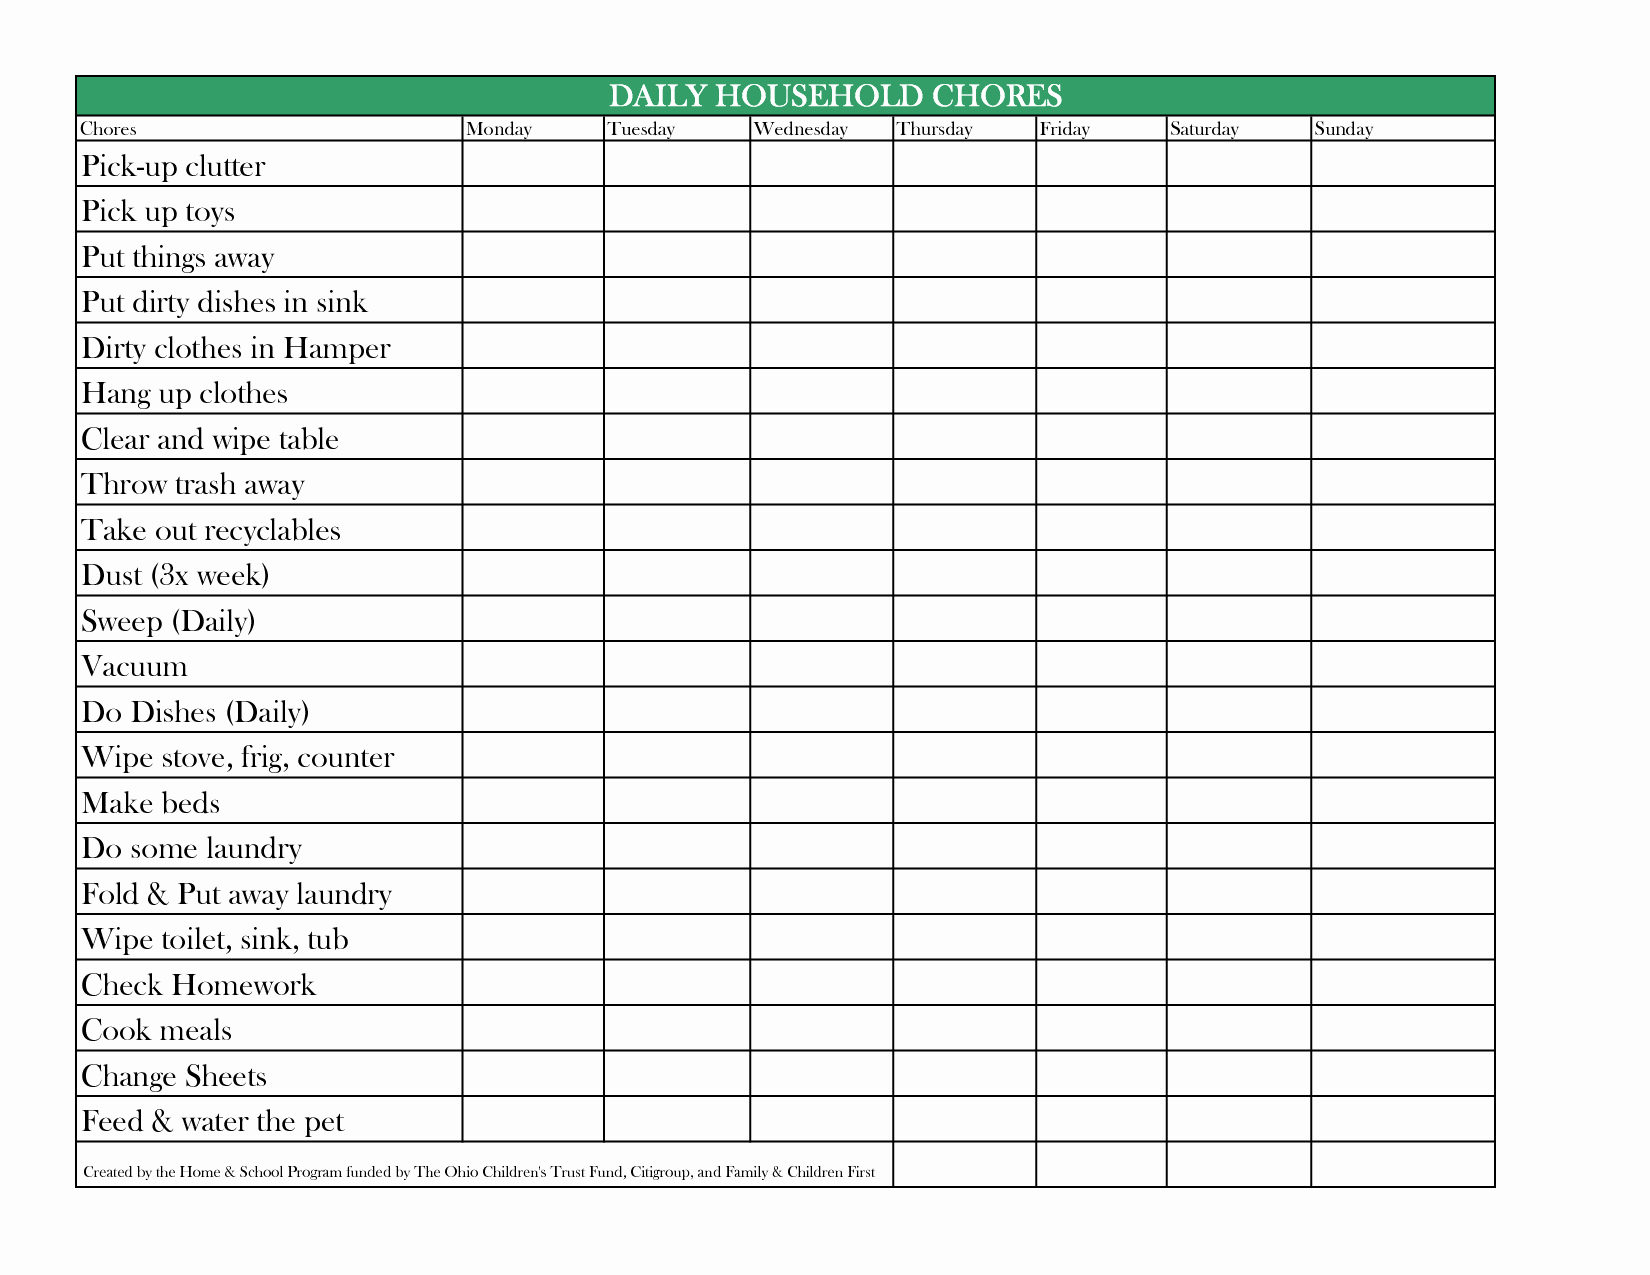 Daily Chore Chart Template Luxury Daily Household Chore List Templates